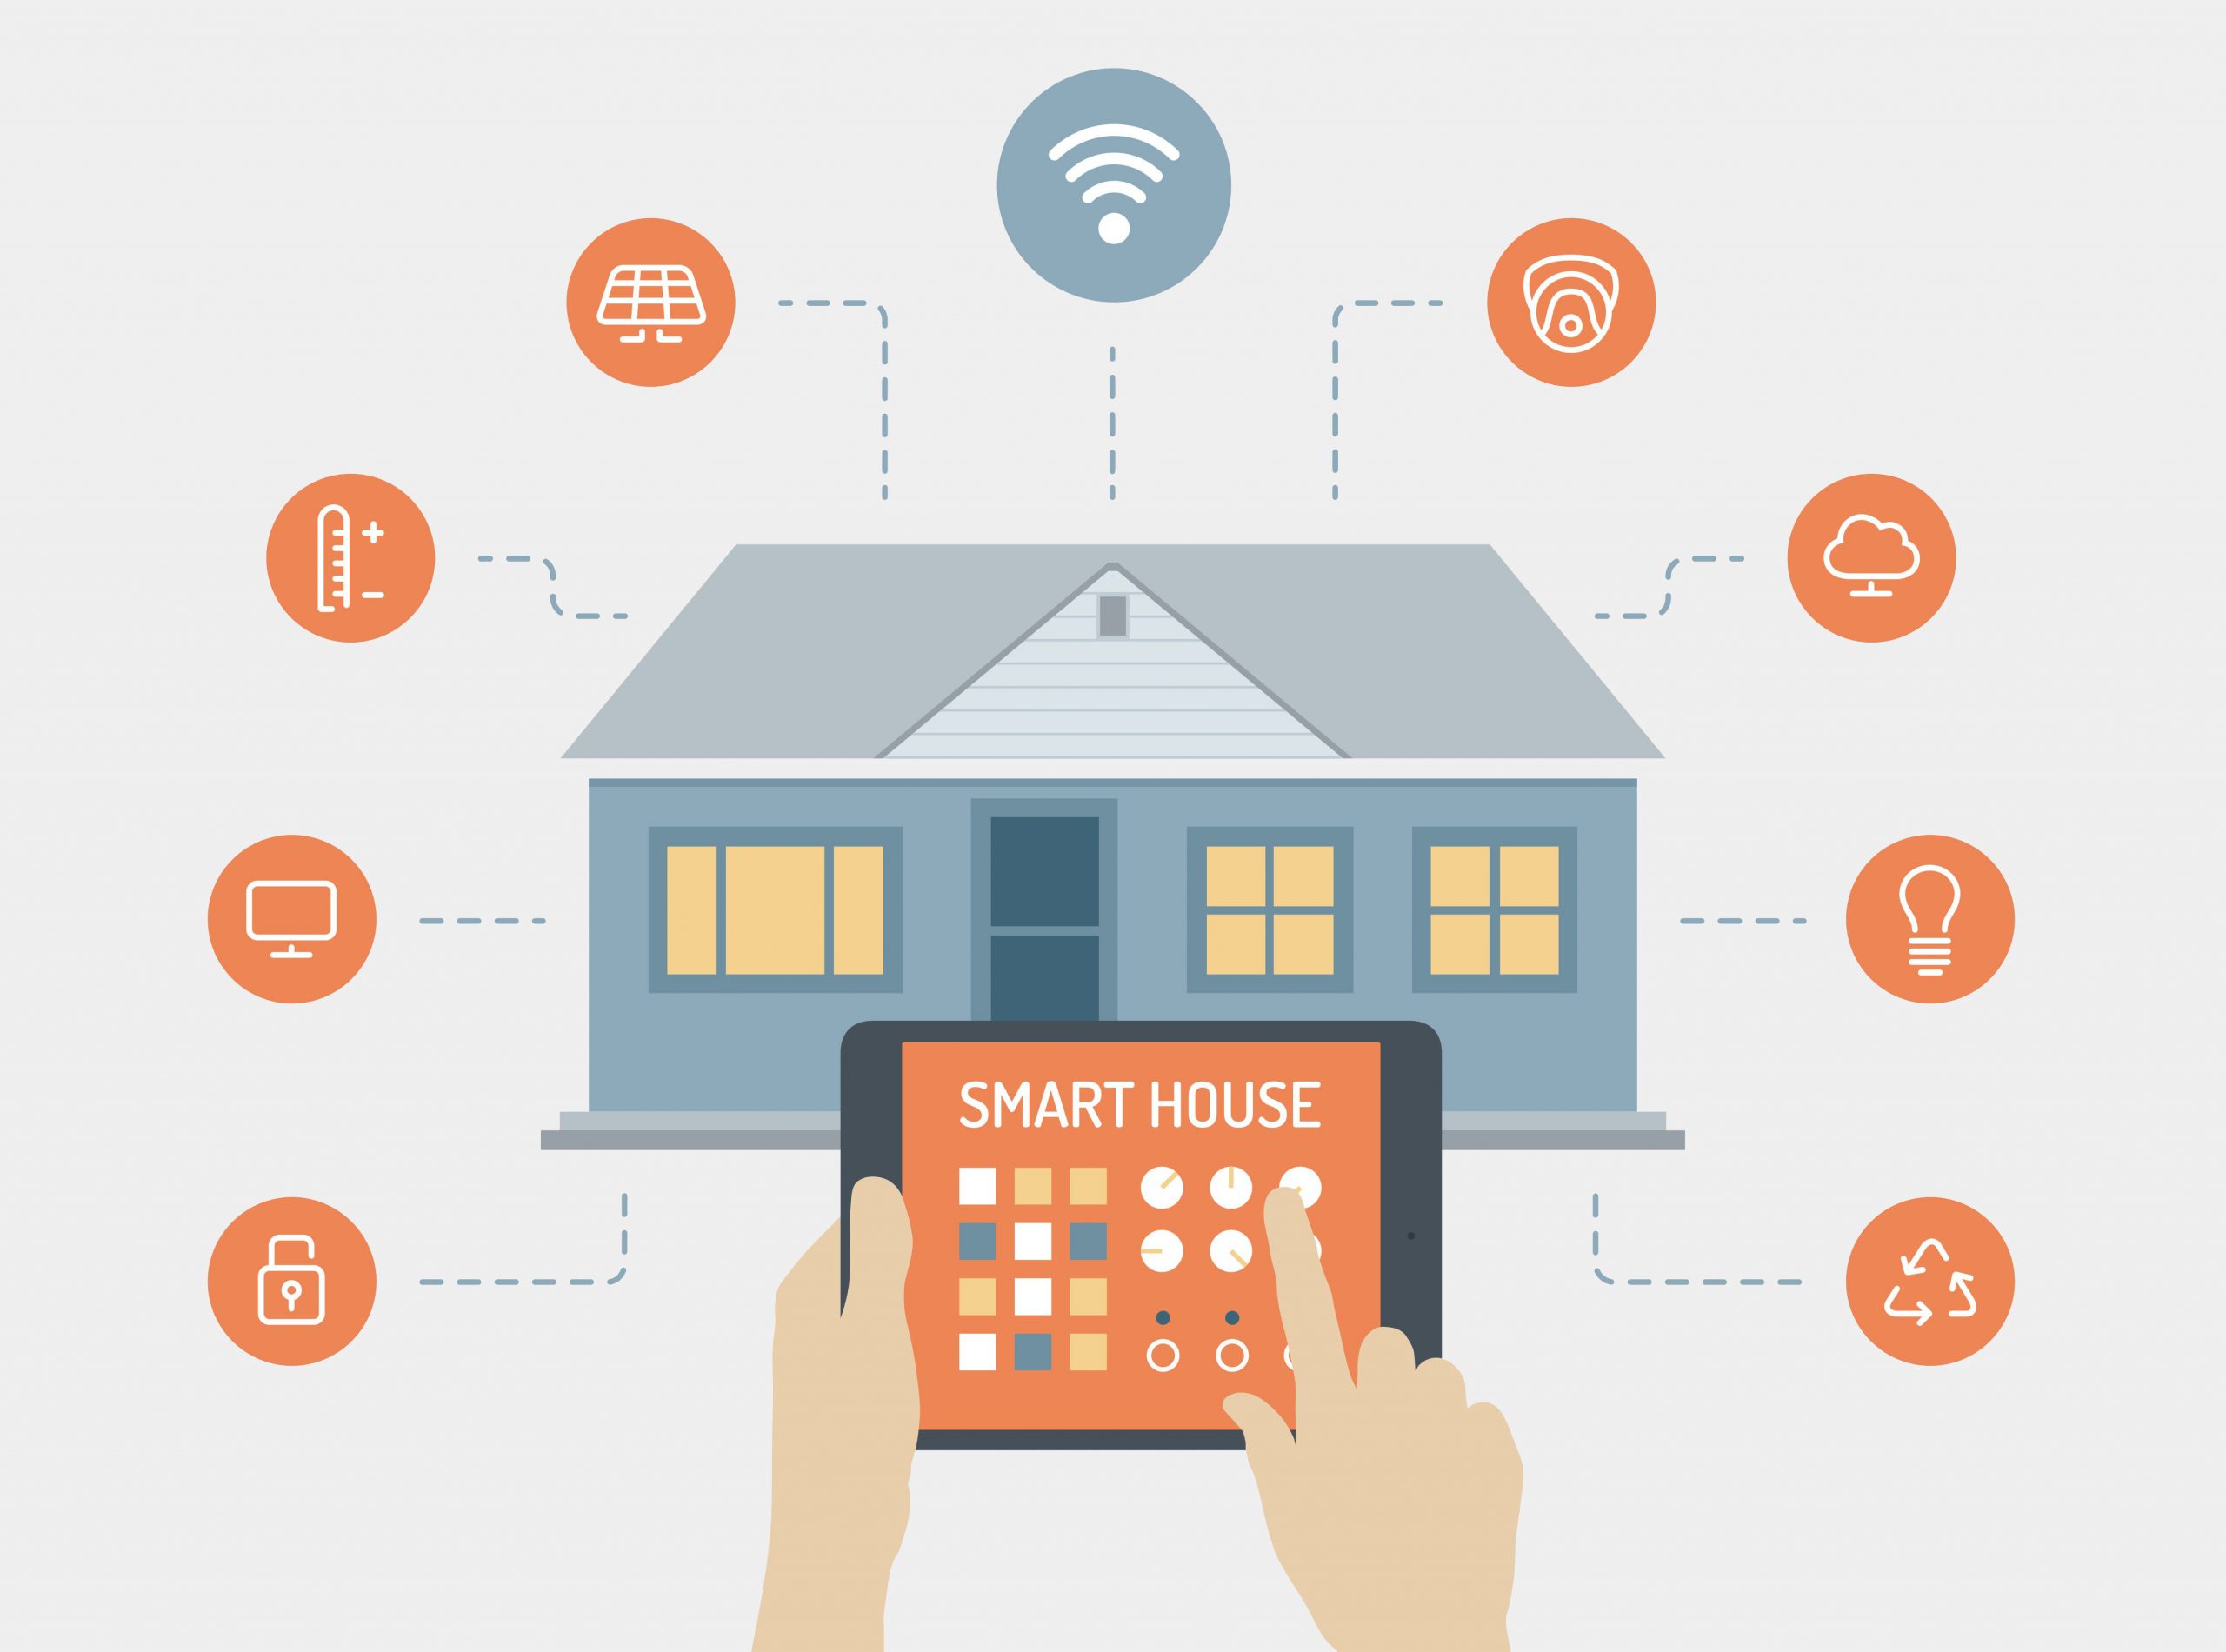 An illustration of a smart house connected through a phone